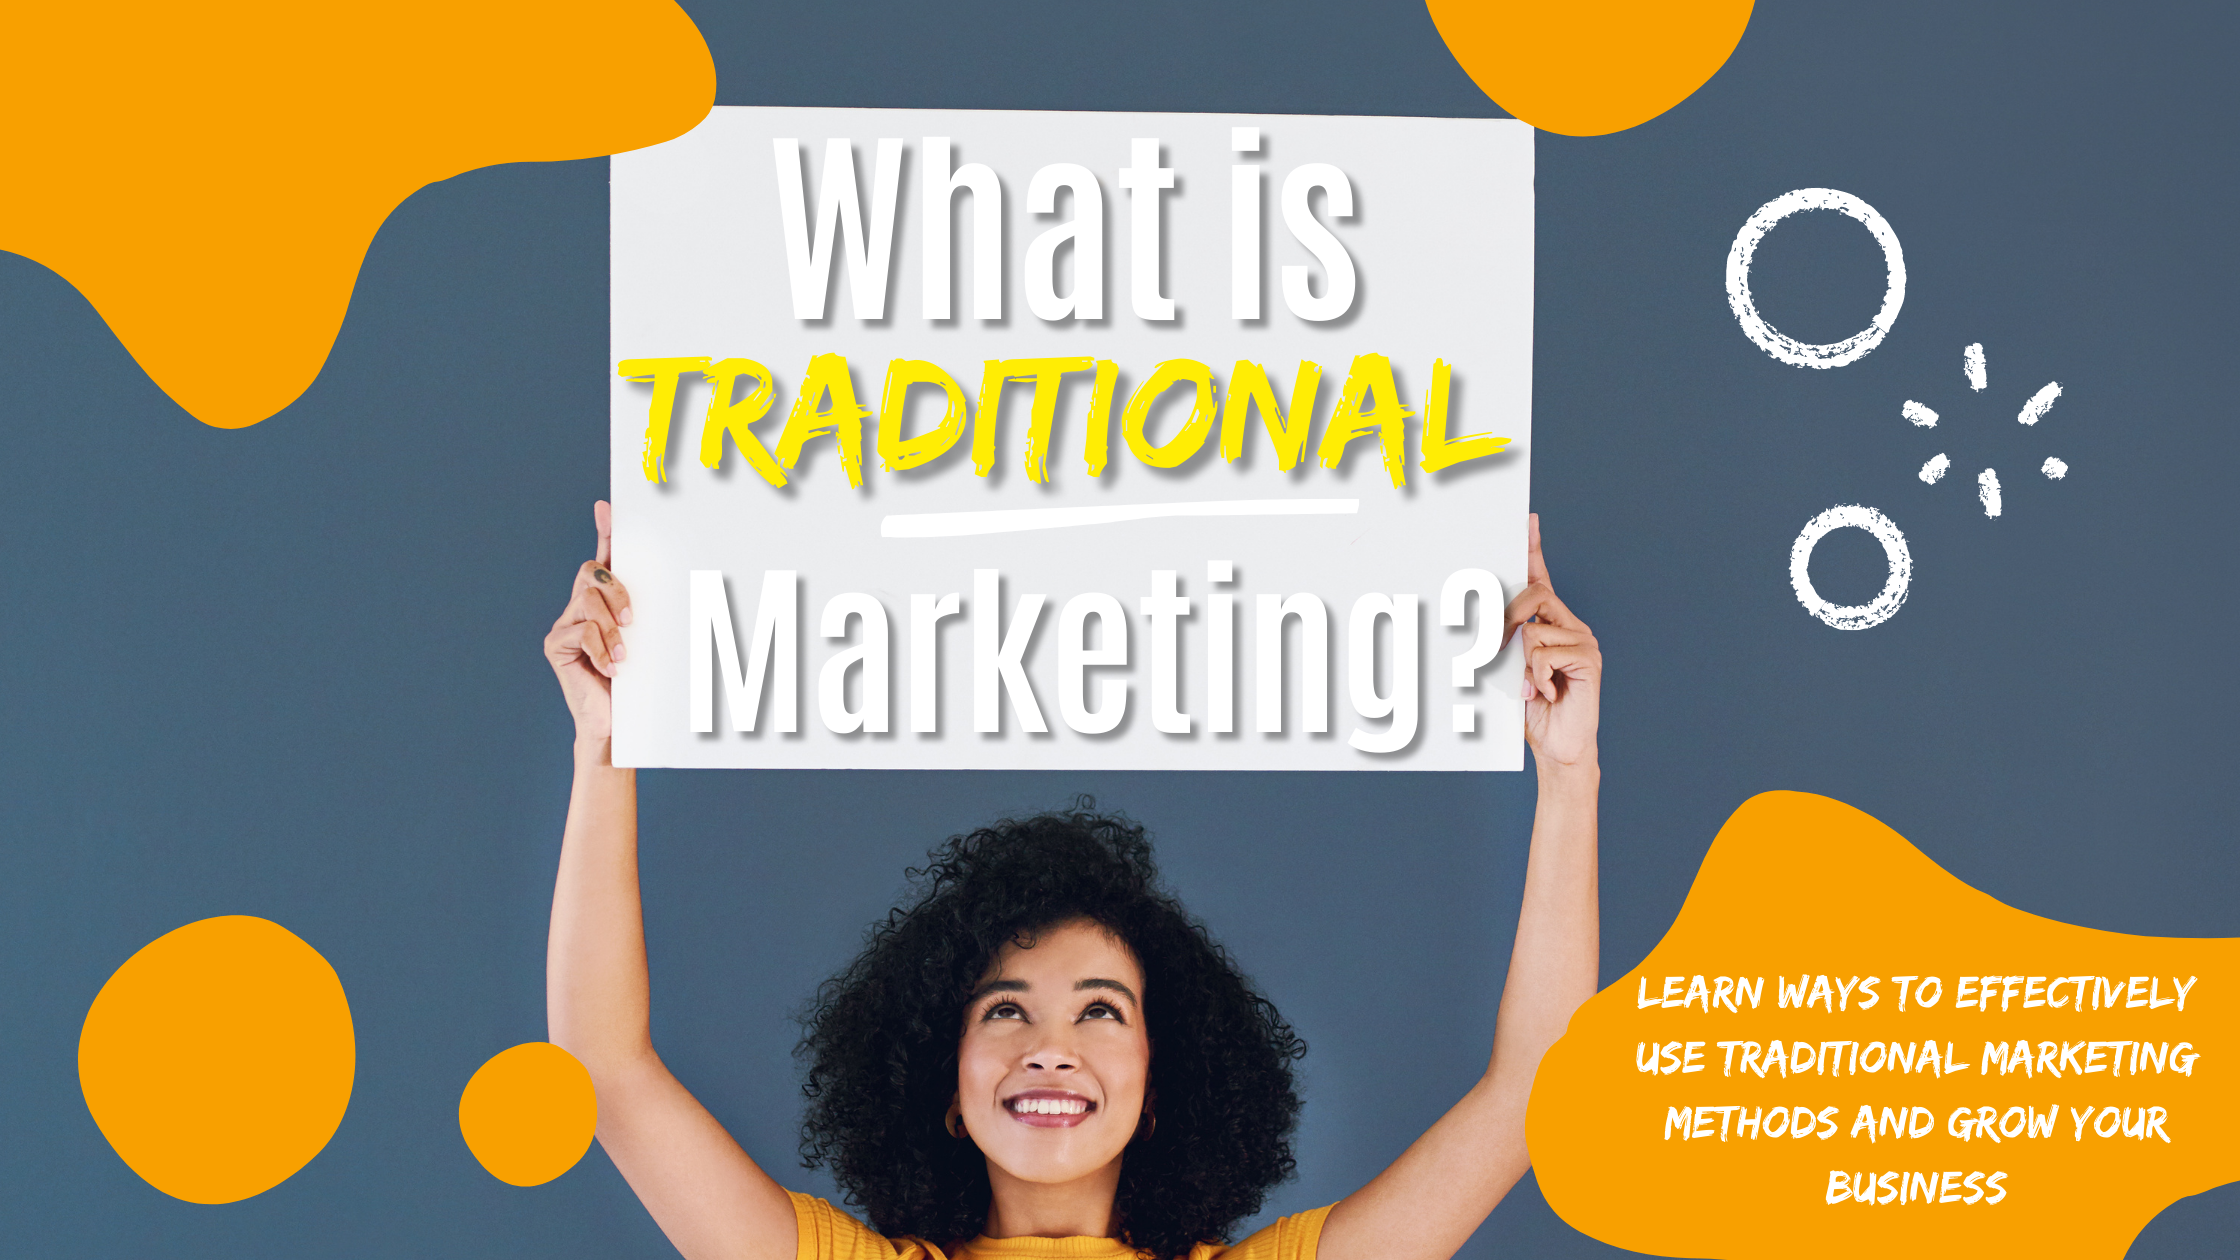 What is Traditional Marketing and how can it help you grow your business?